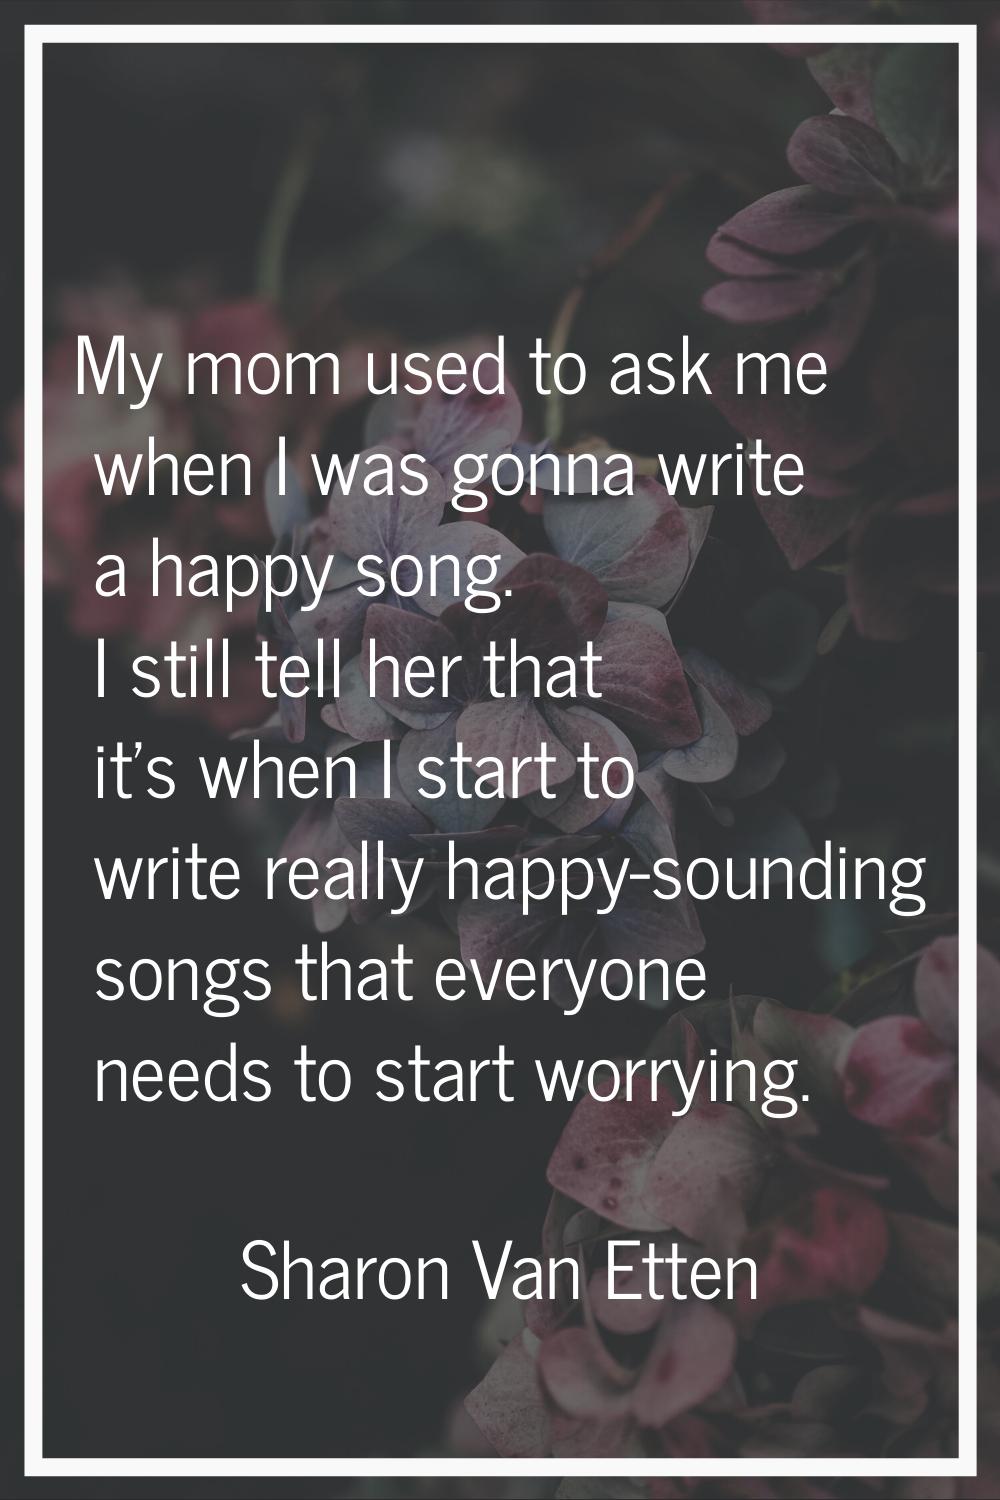 My mom used to ask me when I was gonna write a happy song. I still tell her that it's when I start 